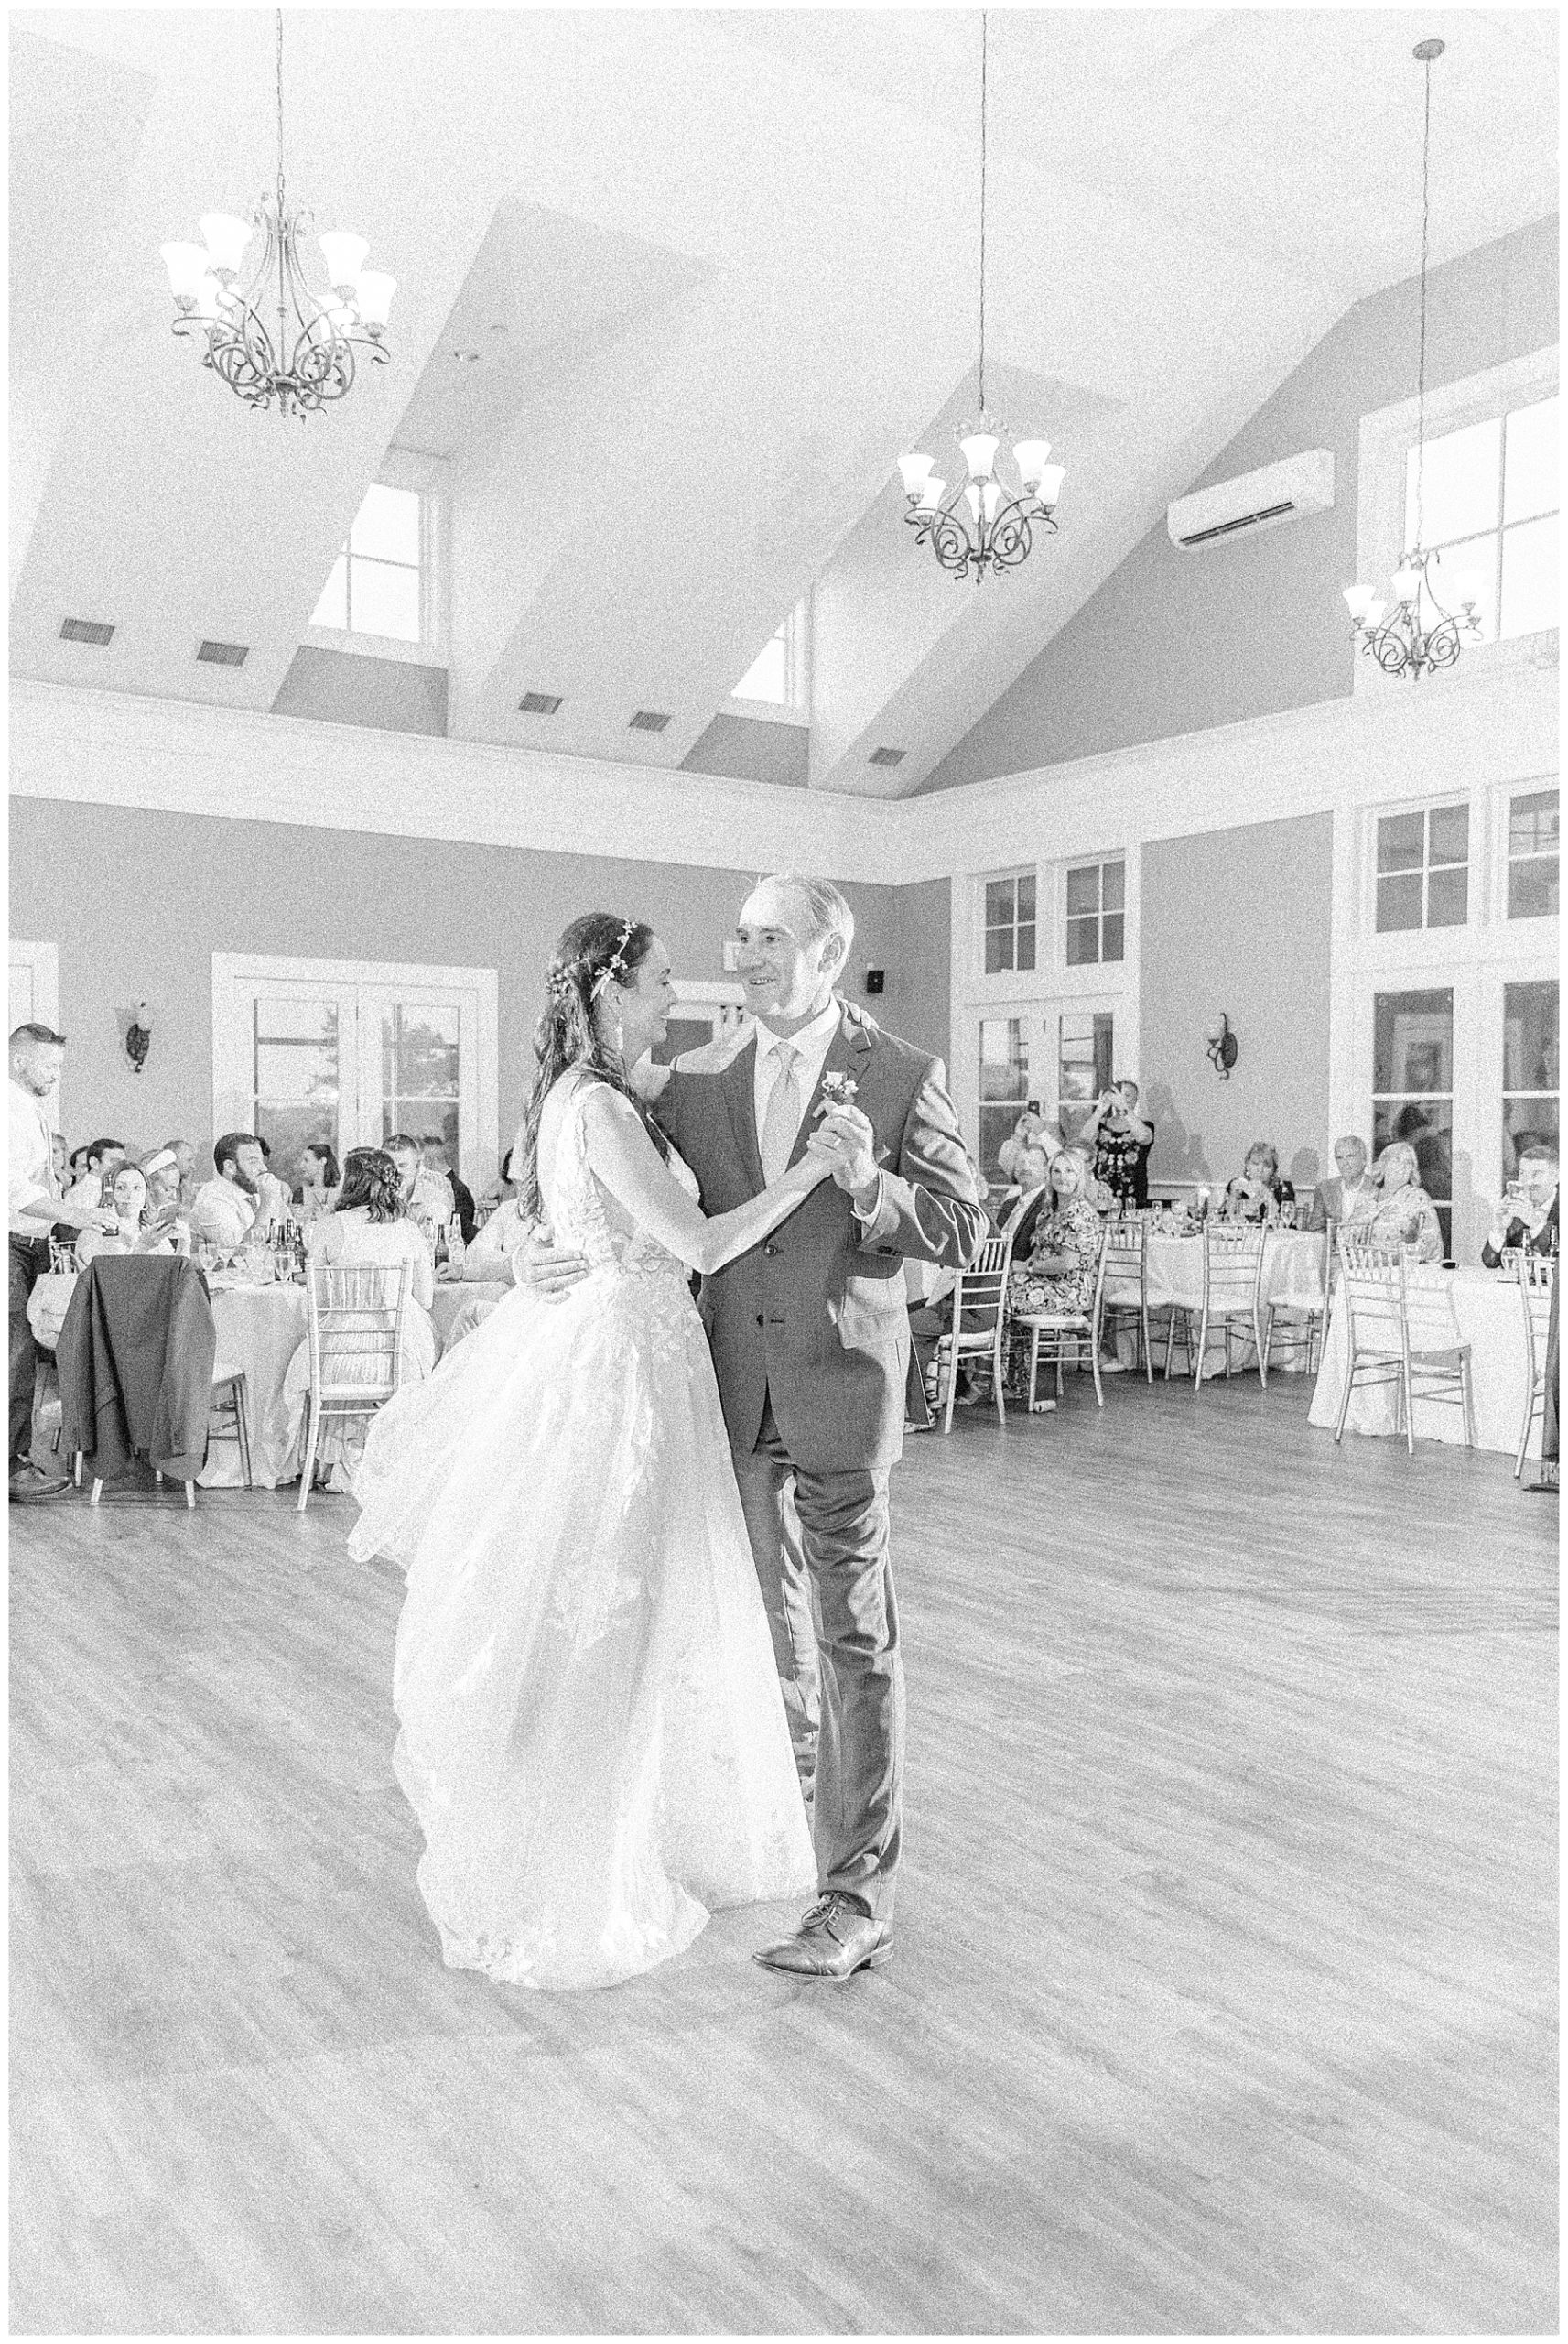 Father-Daughter dance at wedding reception